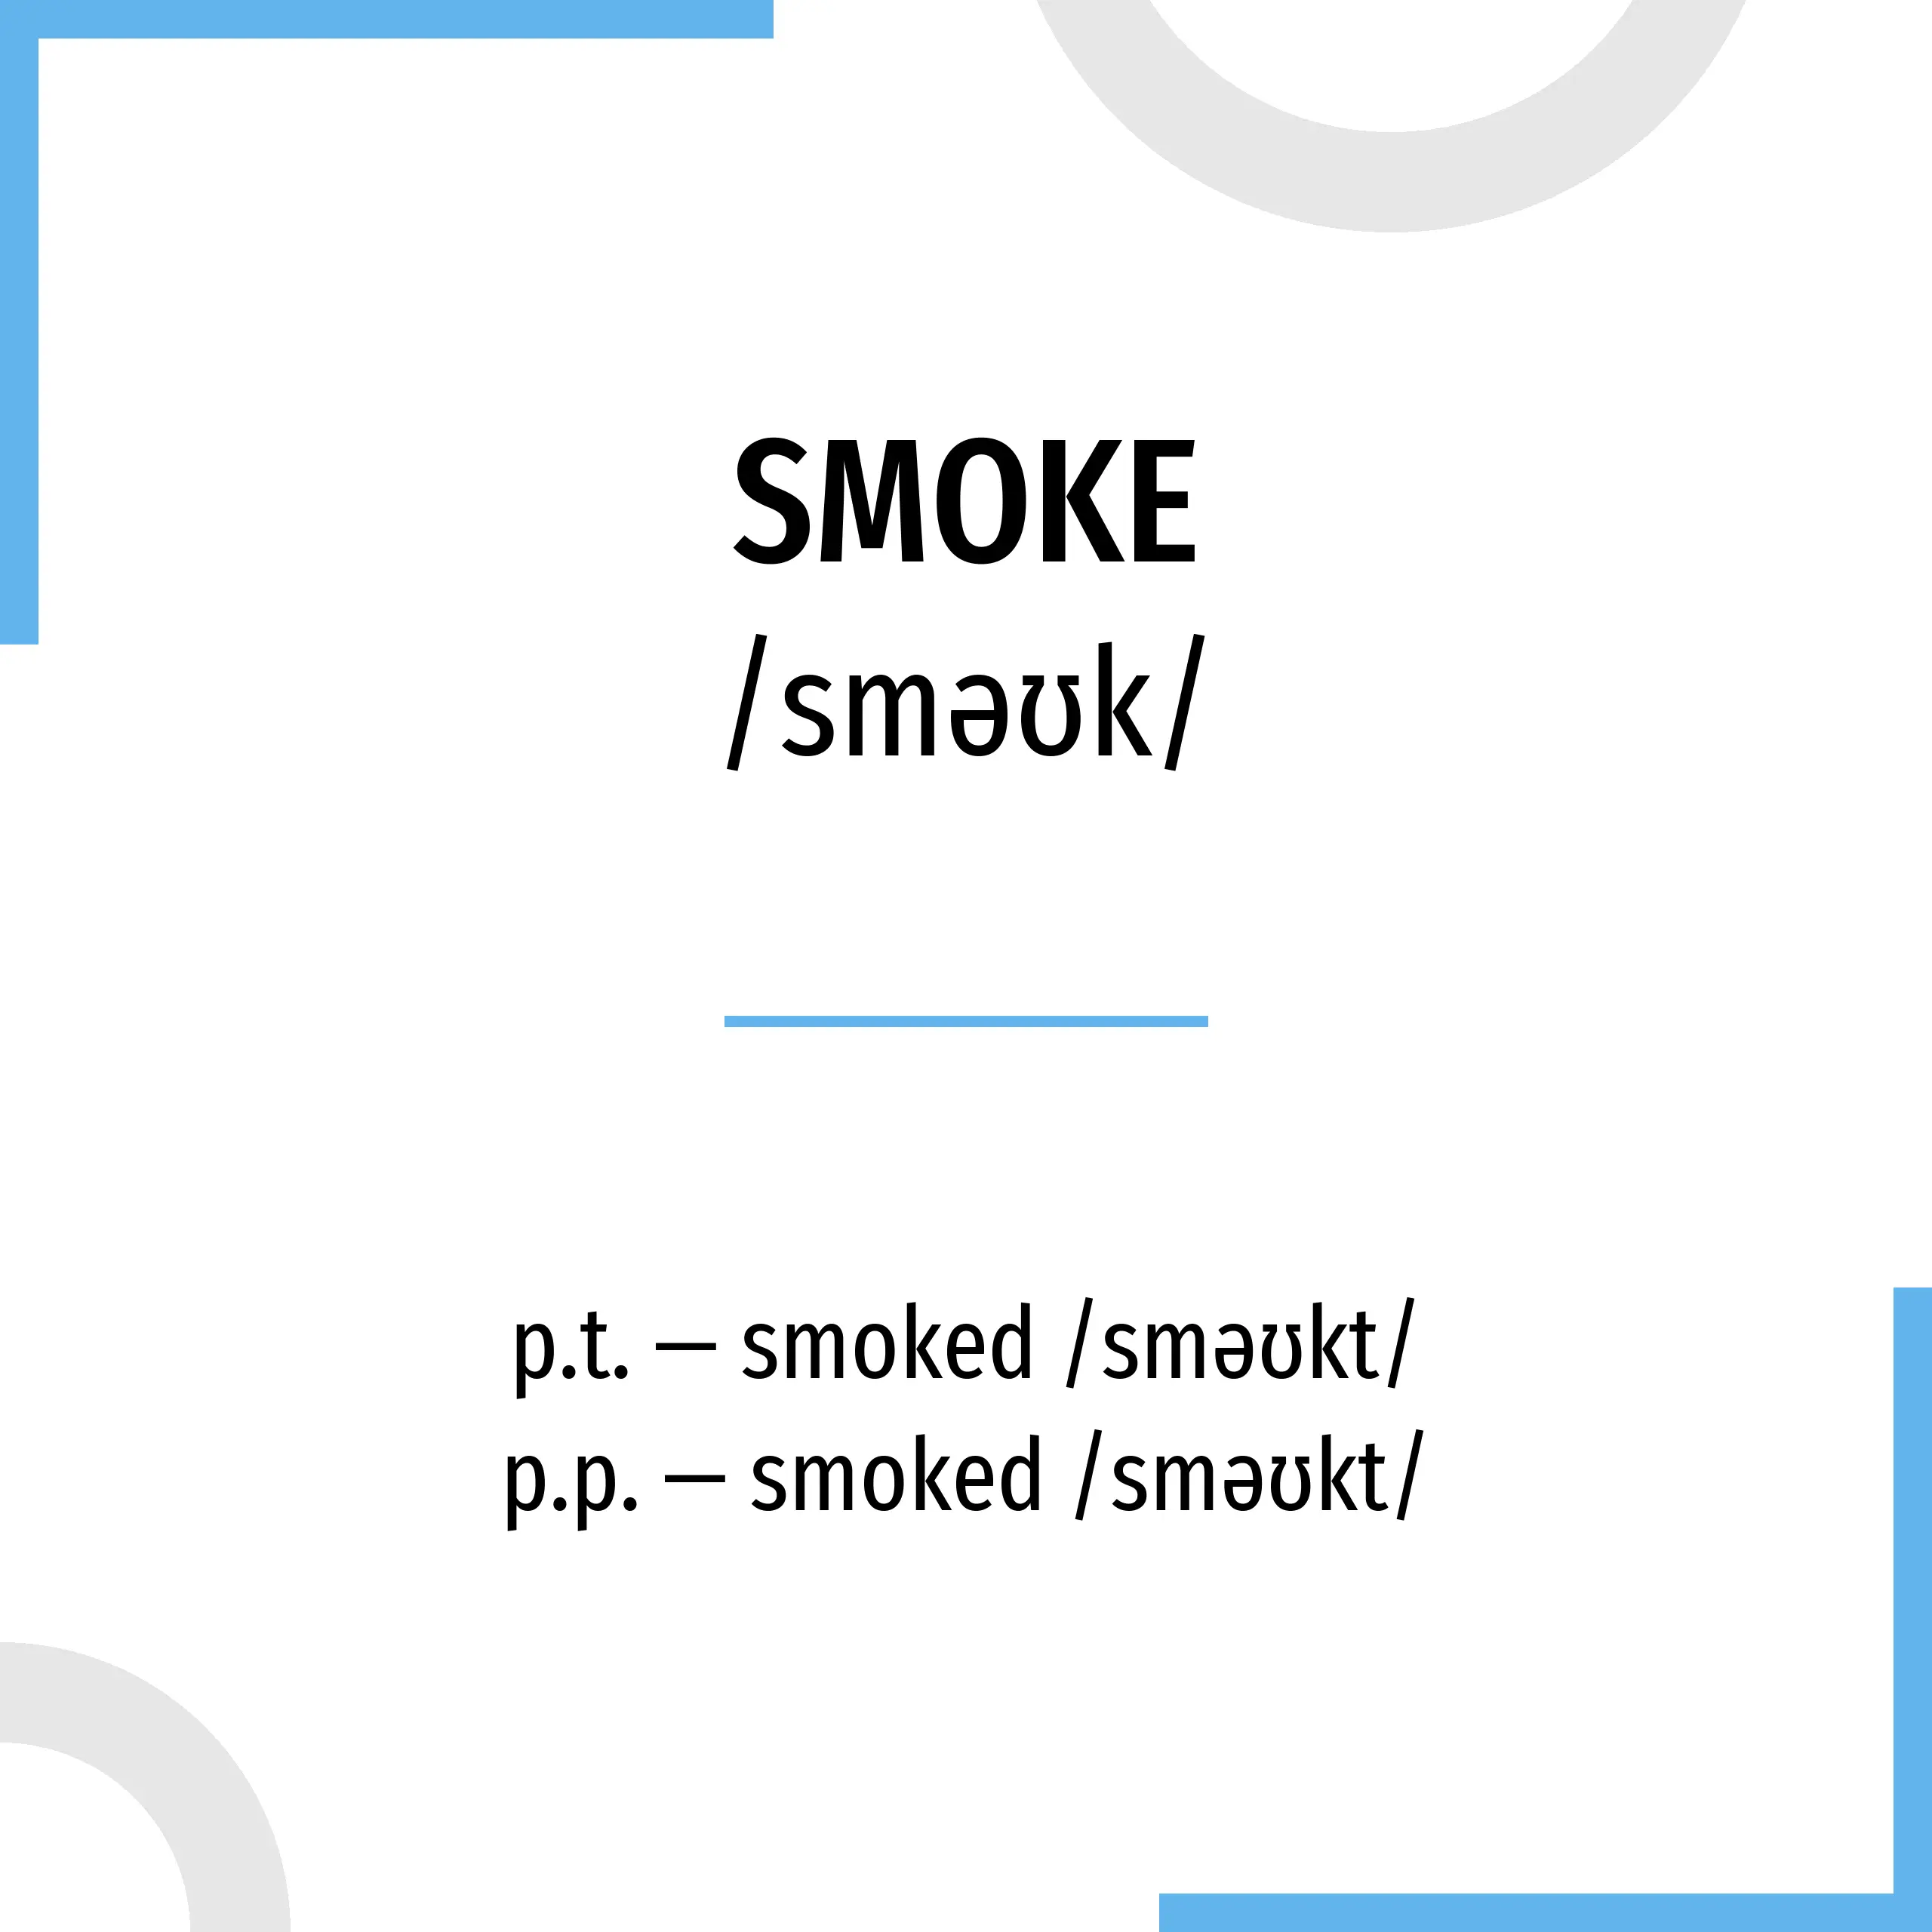 is smoked a verb - Is smoker a noun or verb